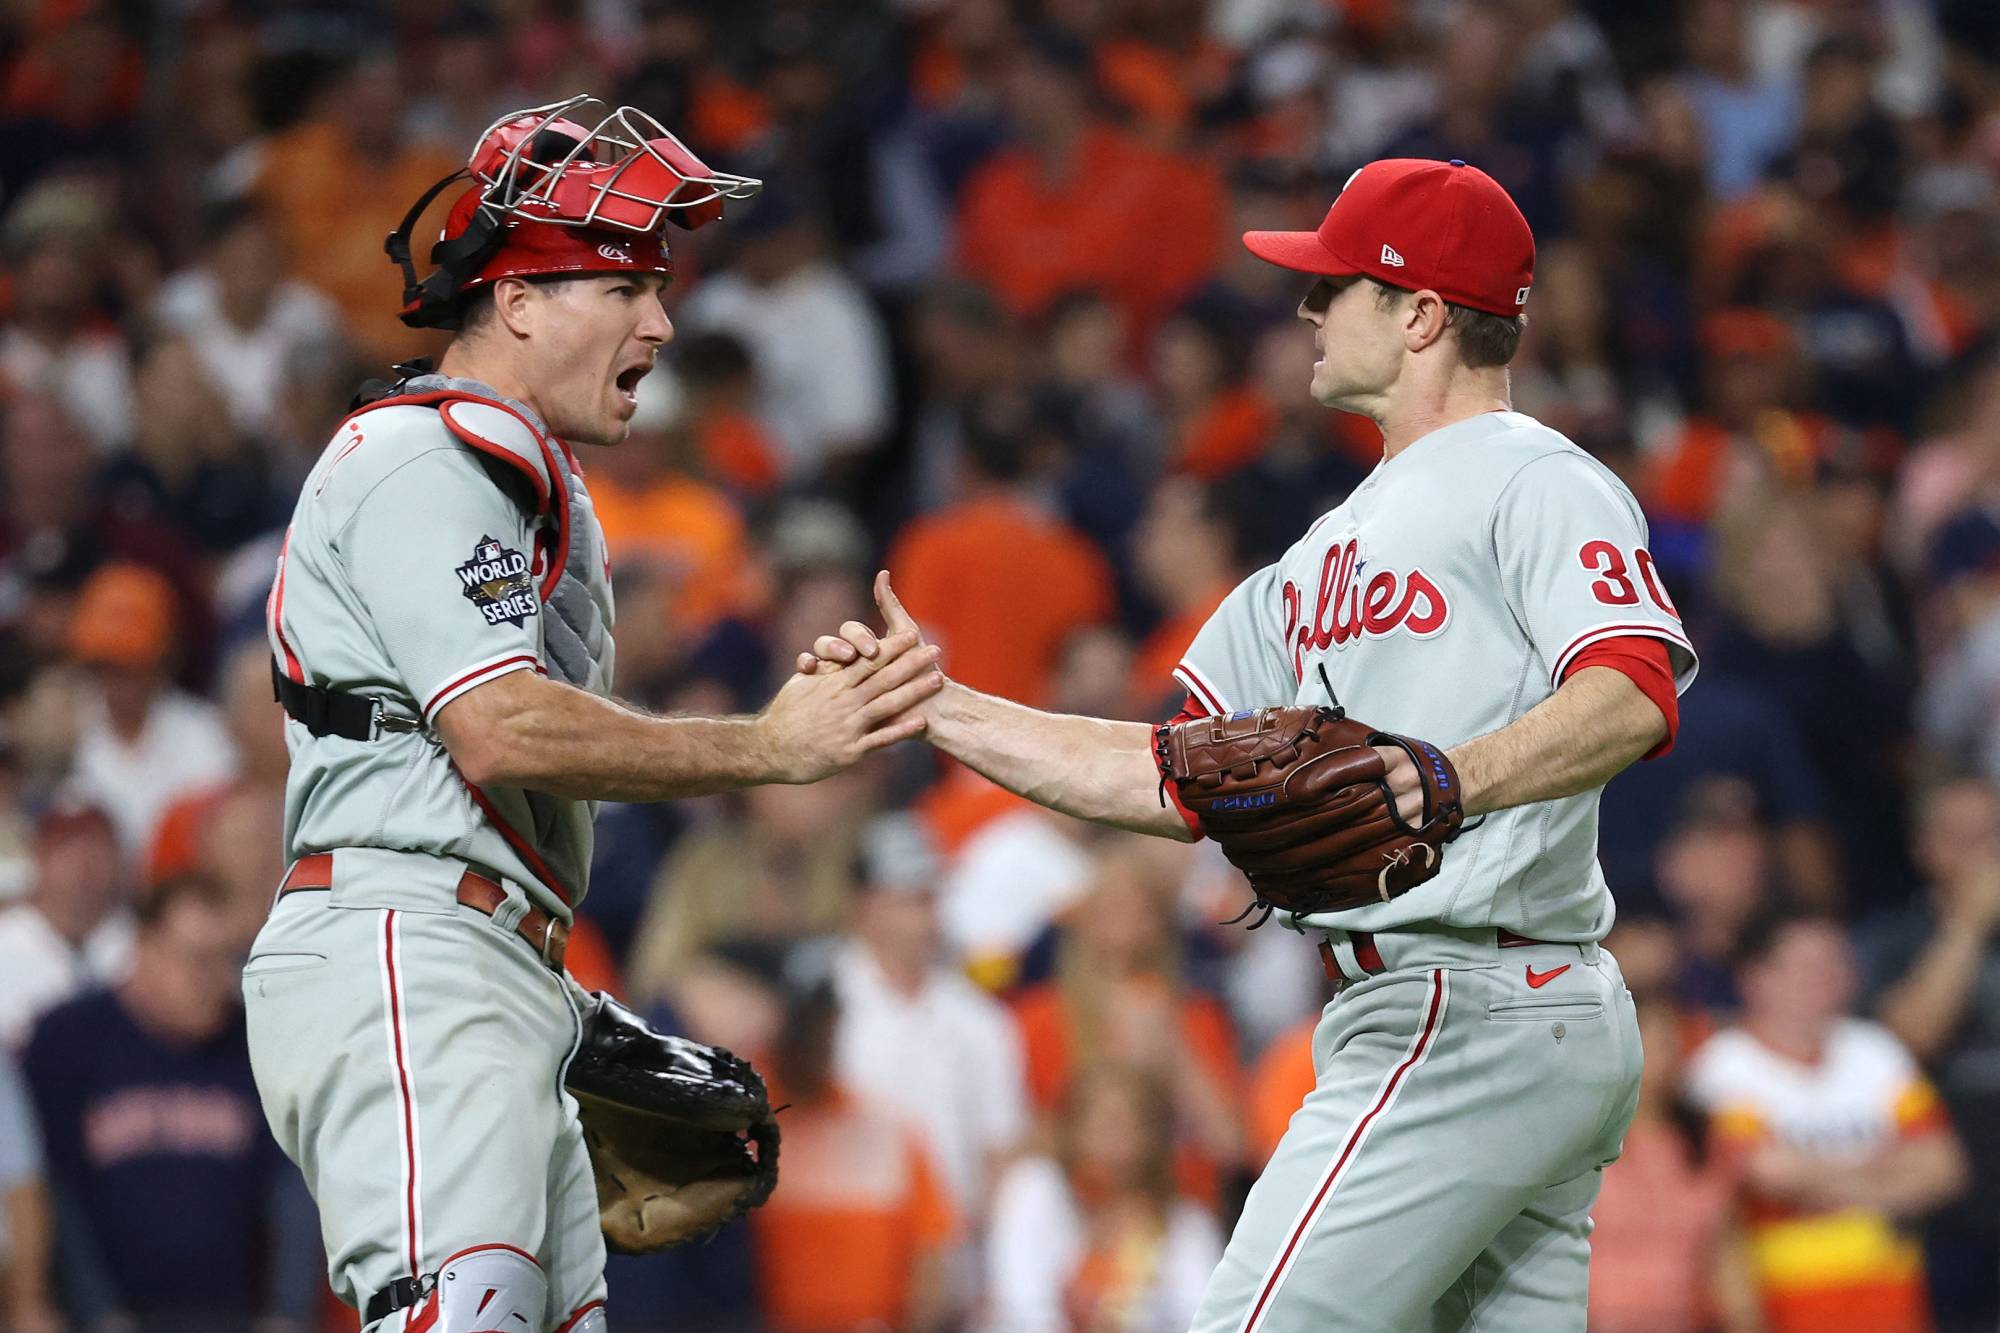 Phils' Realmuto 1st postseason inside-the-park HR by catcher